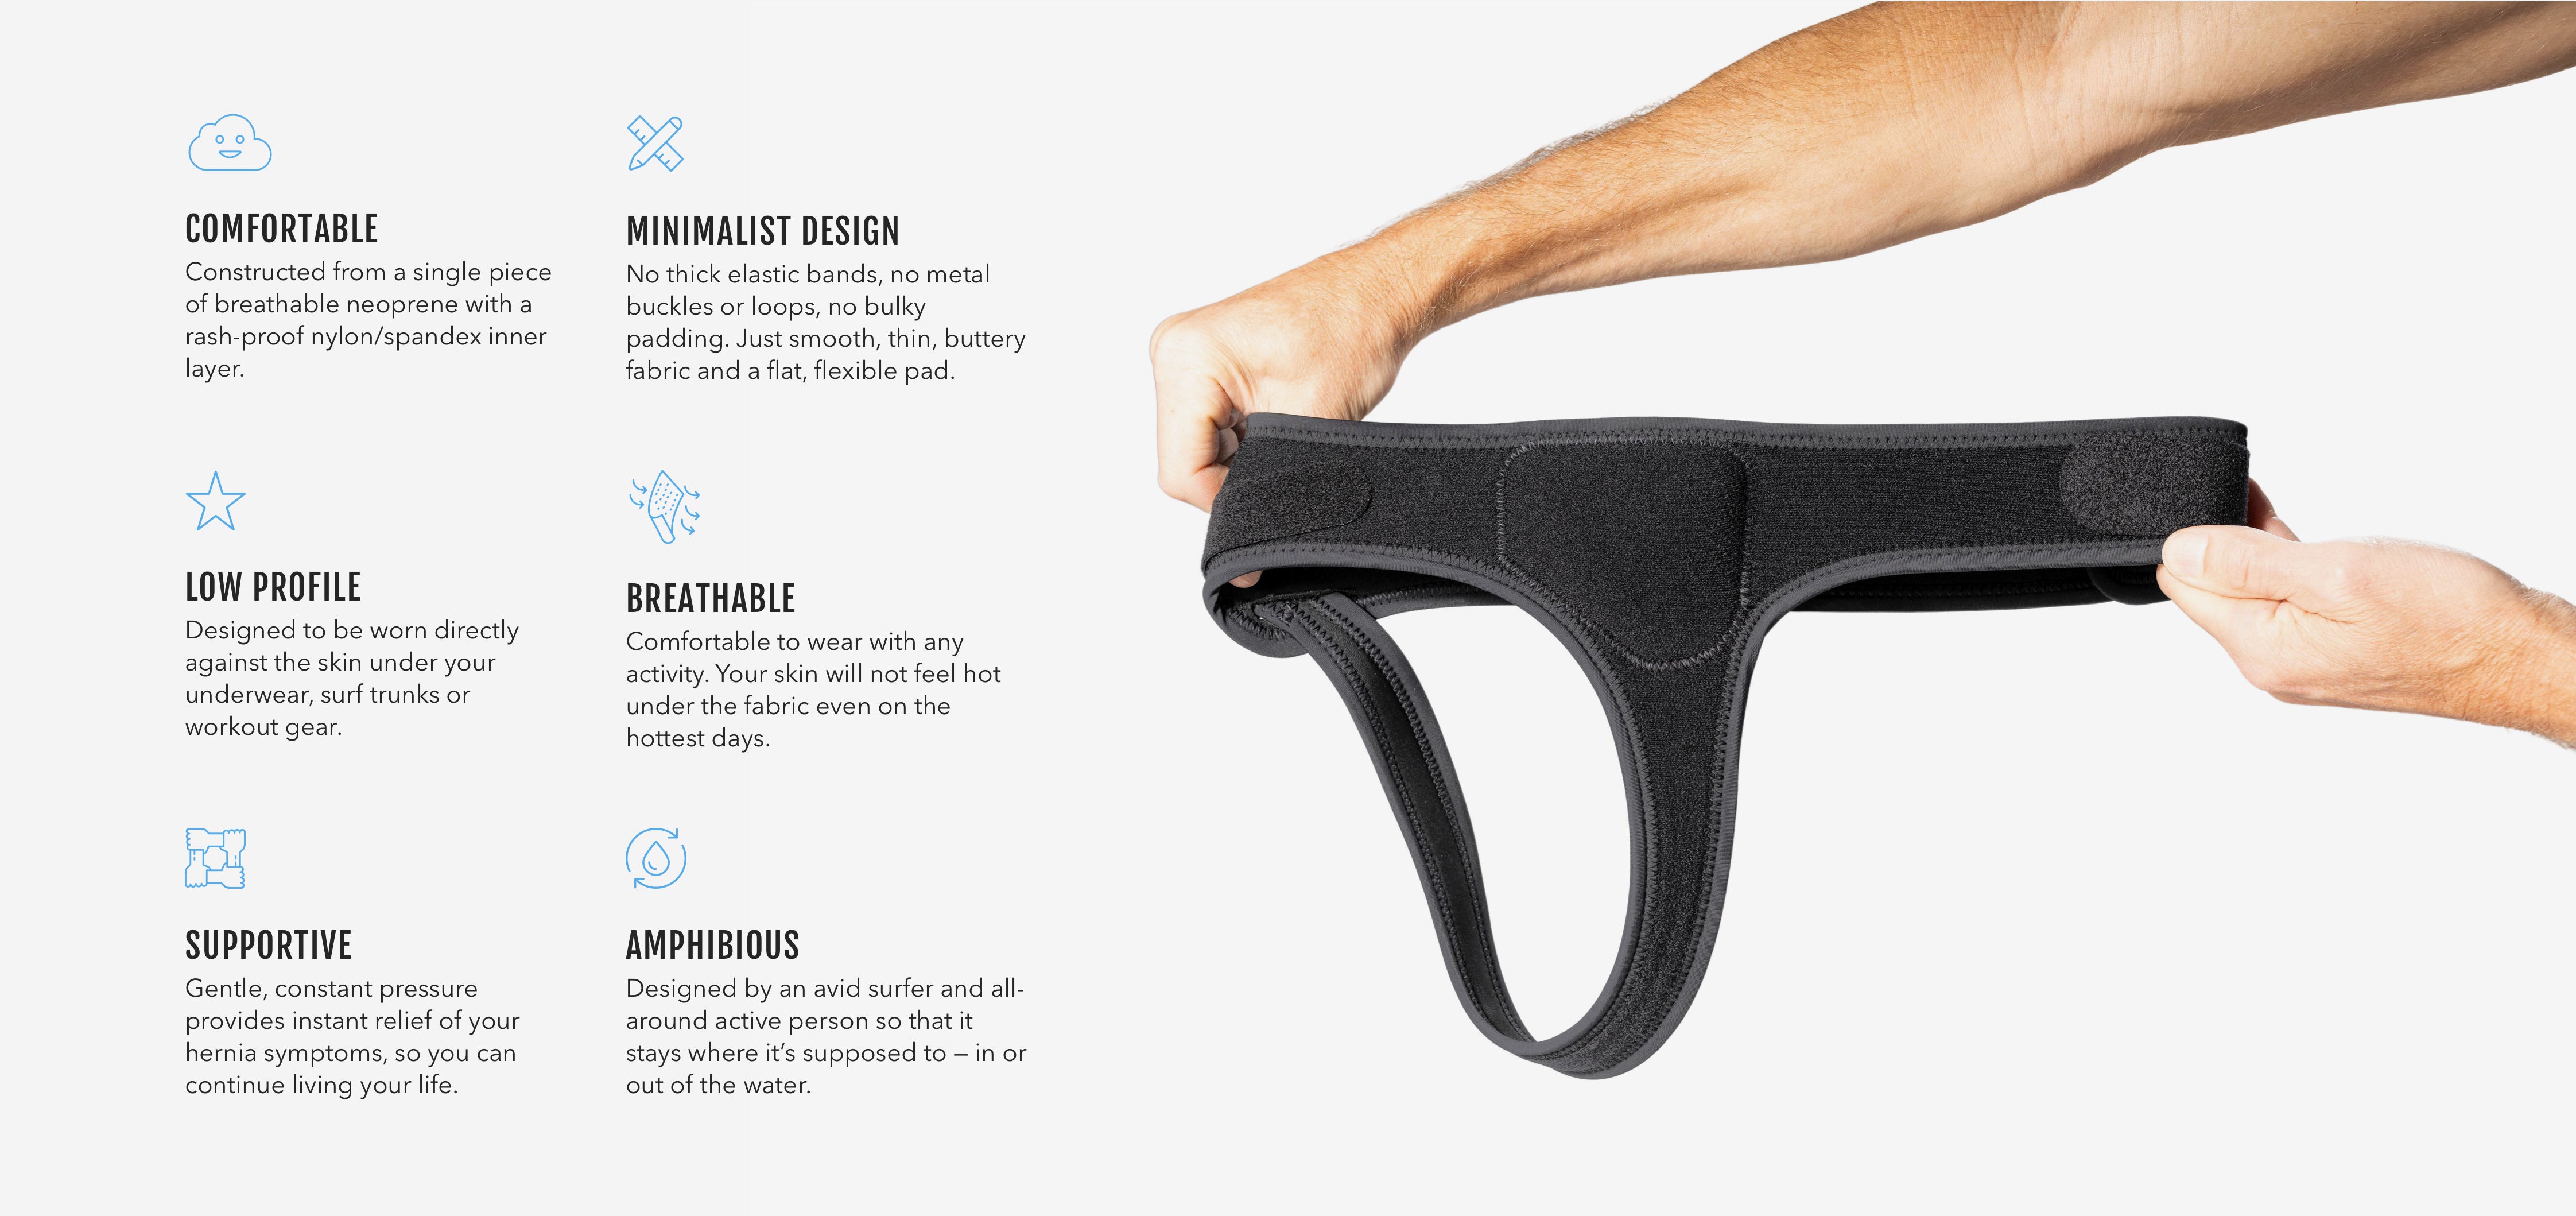 Minimalist single side hernia belt in hands next to text with key features